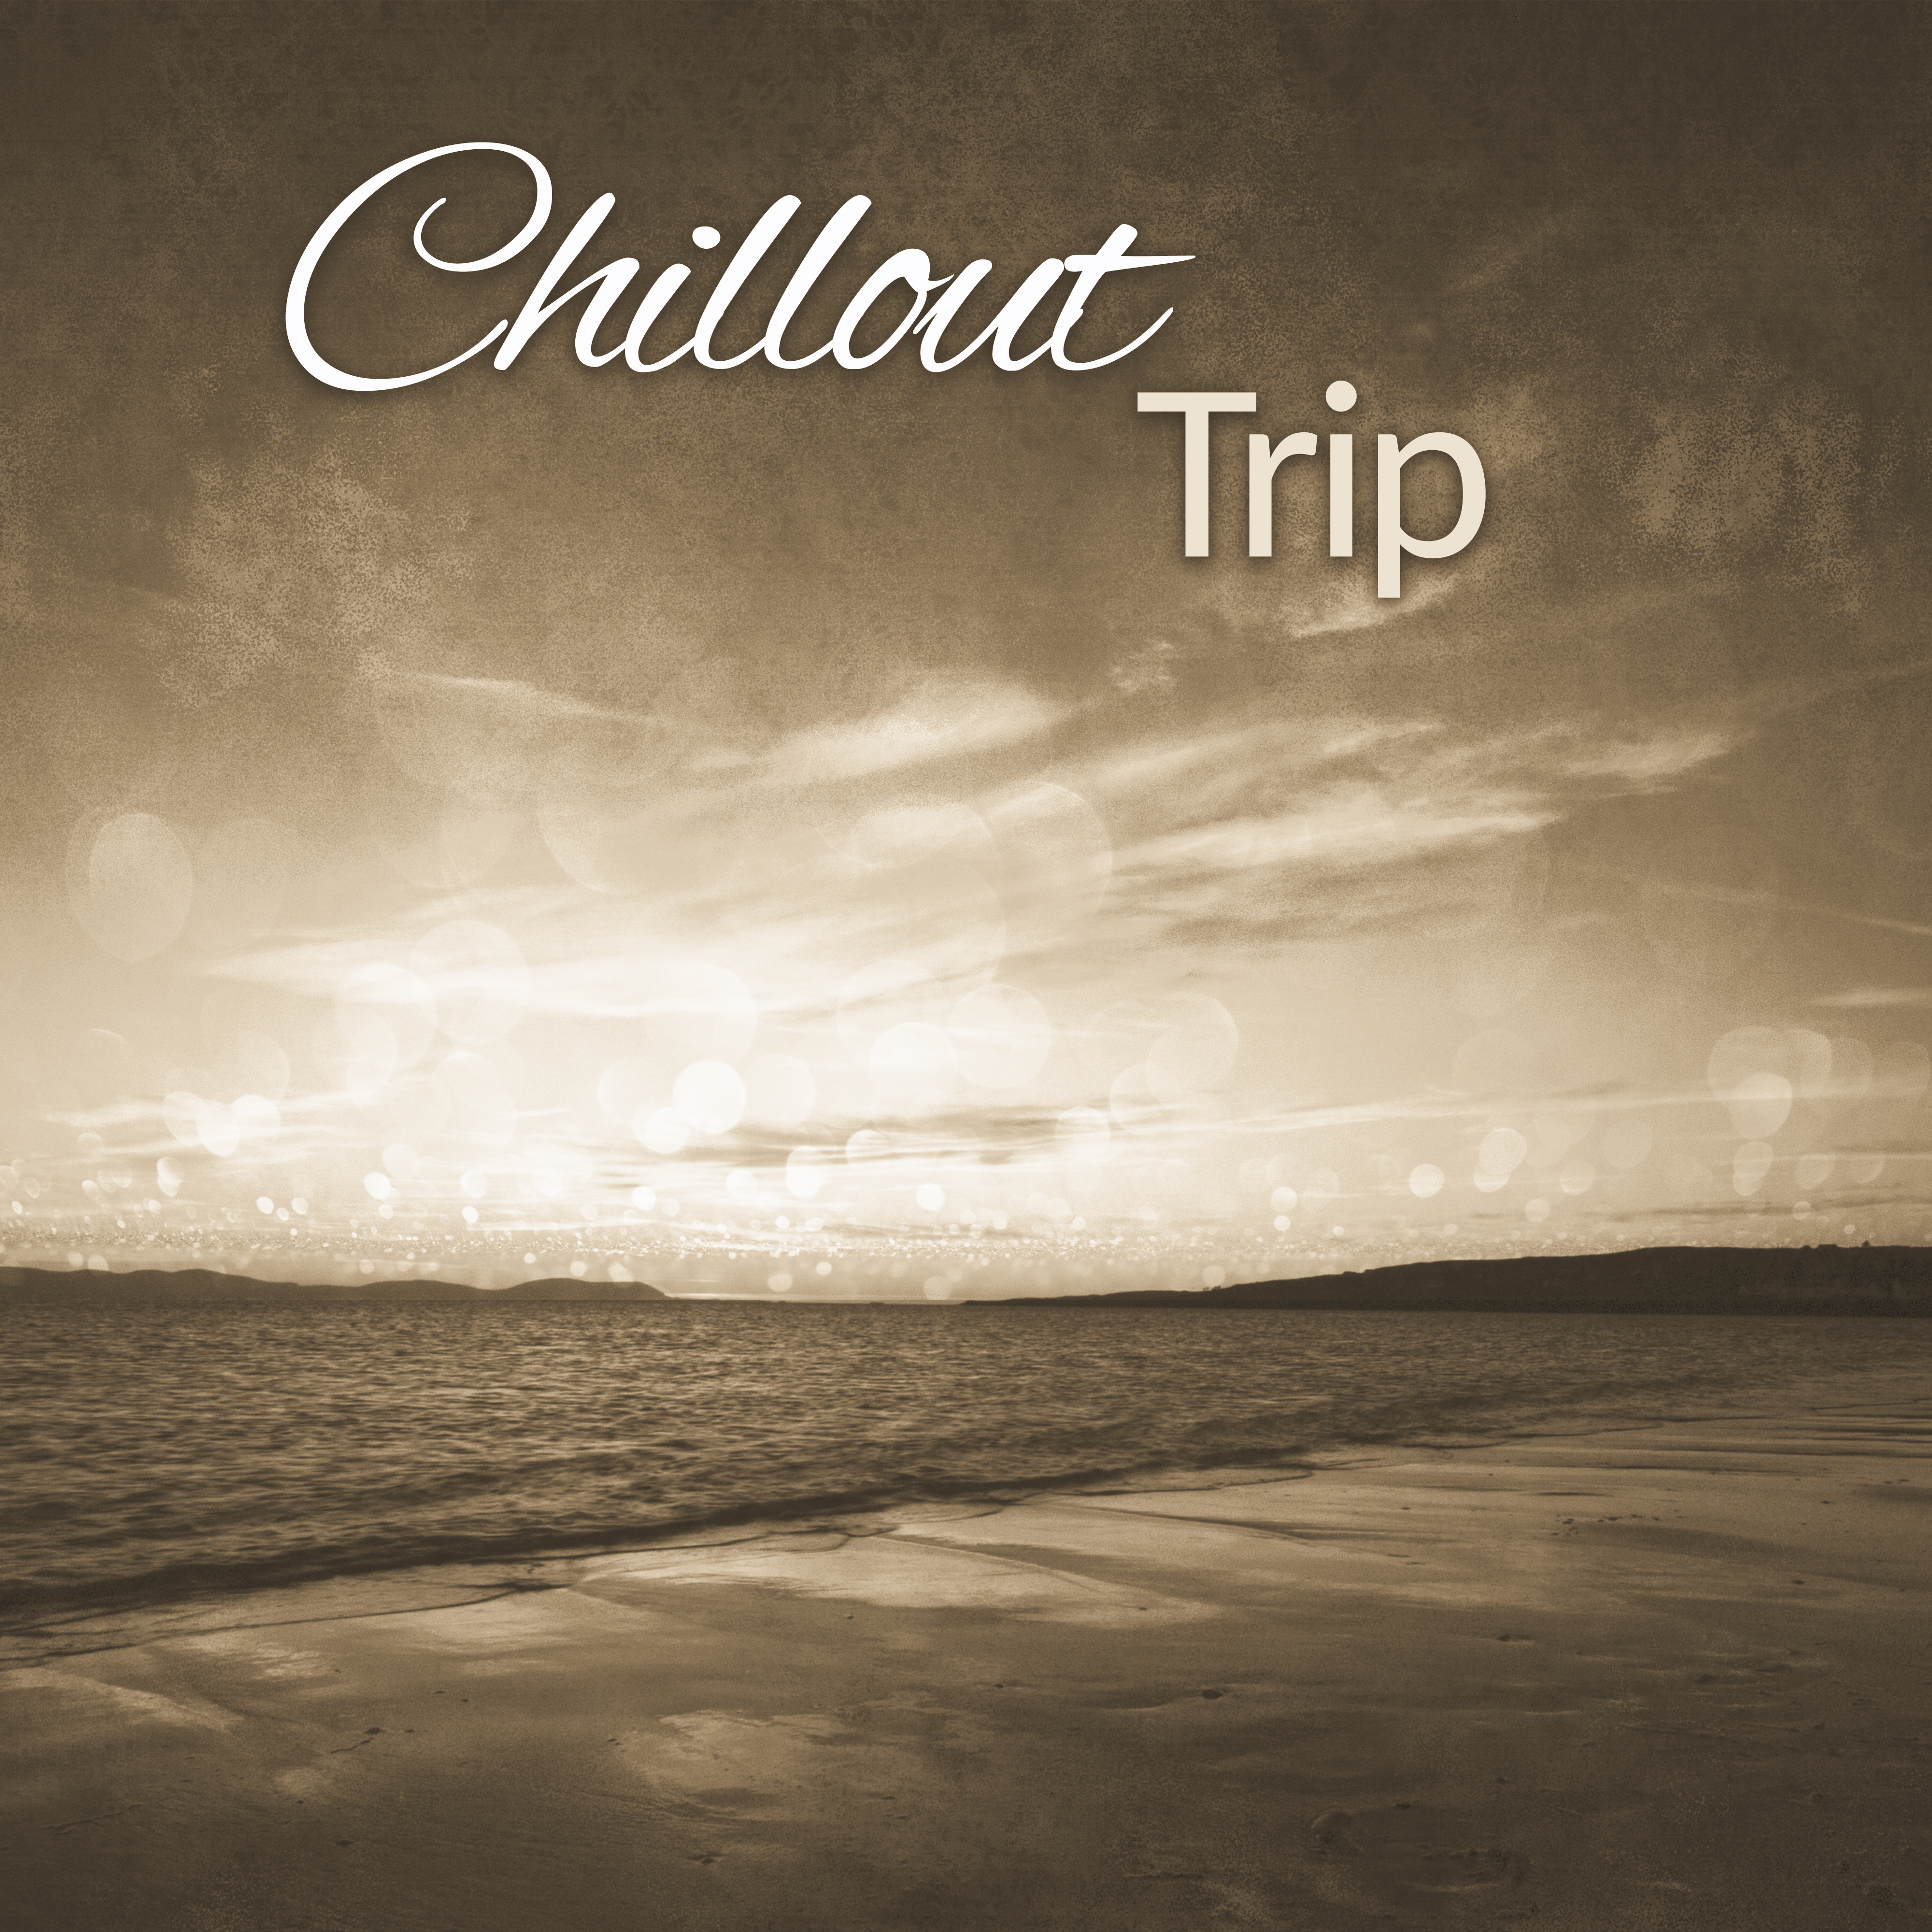 Chillout Trip – Hot Chill Out Music, Relax, Good Vibes Only, Best Way to Chillout